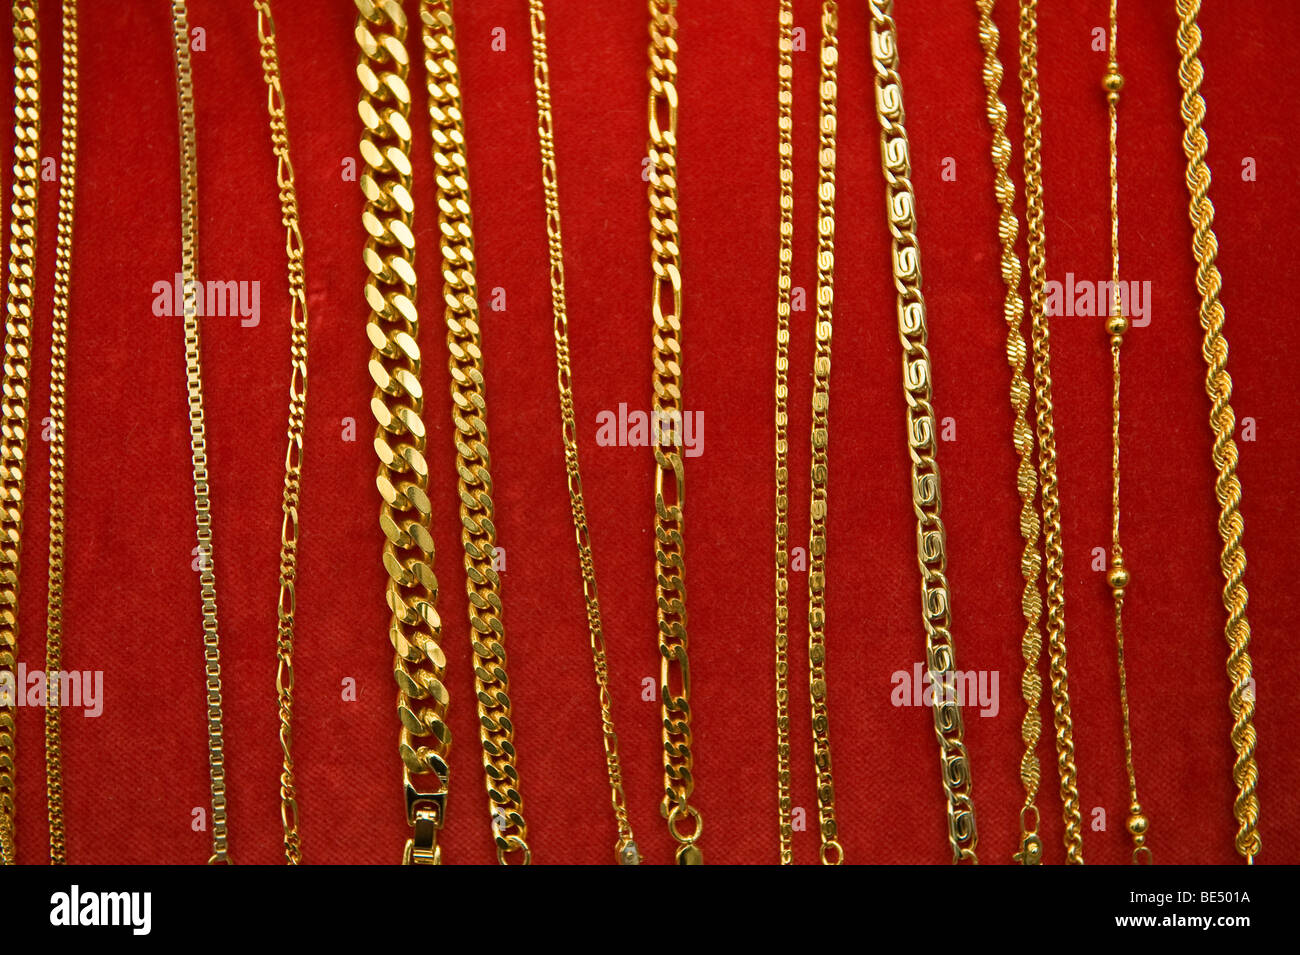 image of gold chain assortment on red velvet display board Stock ...